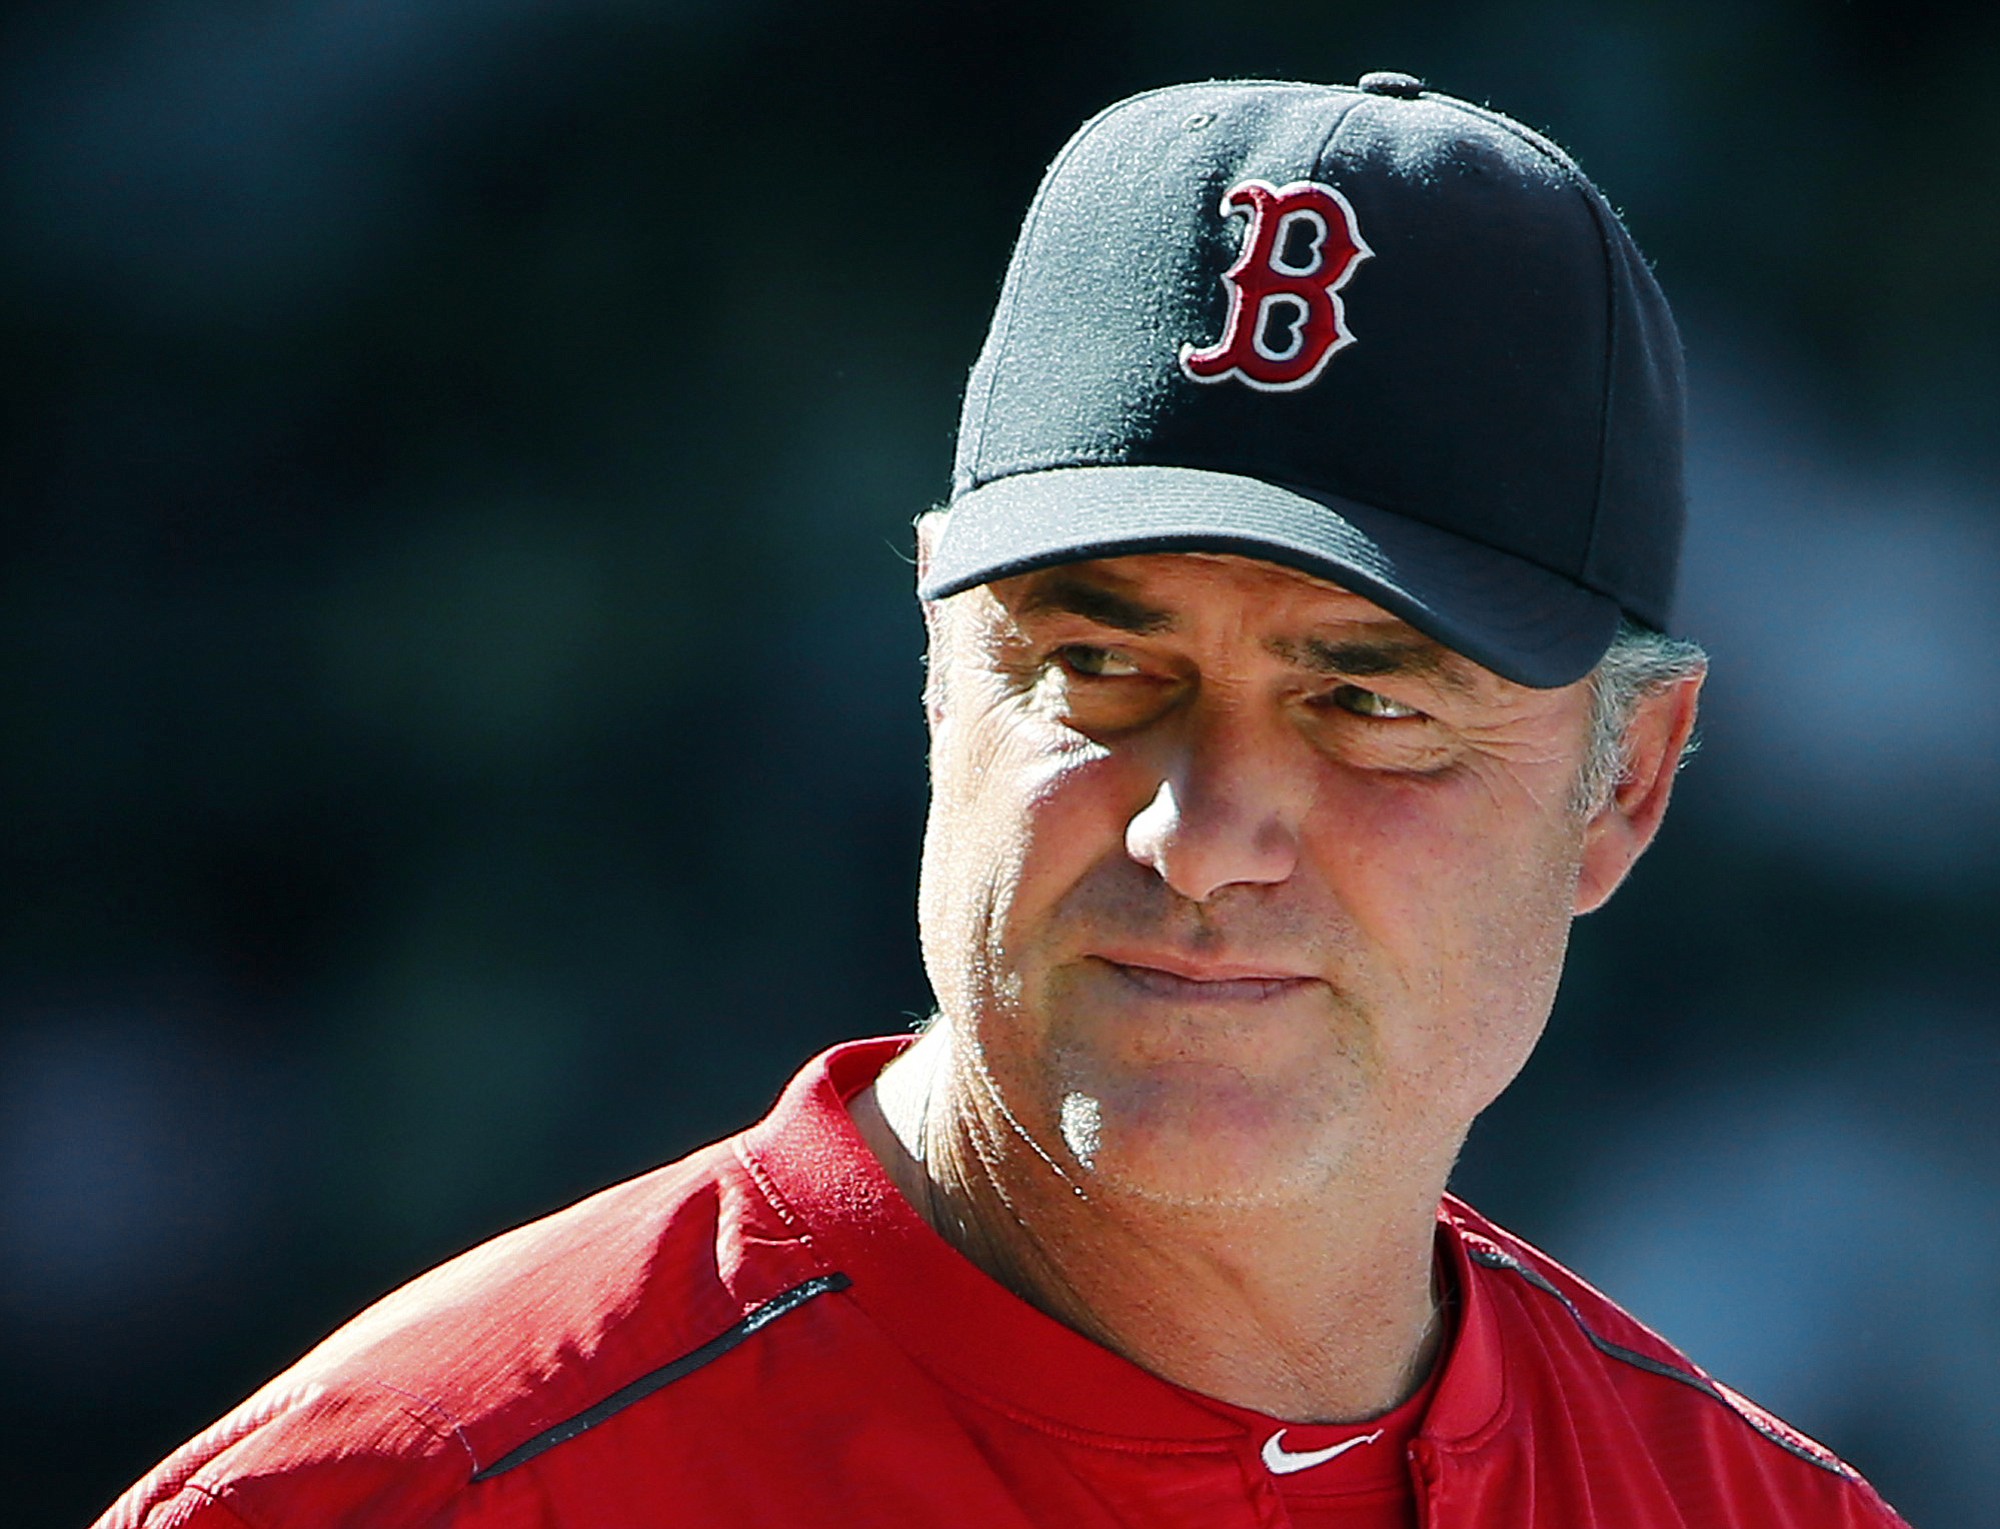 Boston Red Sox manager John Farrell said Friday, Aug. 14, 2015, he would take a medical leave for treatment of lymphoma.